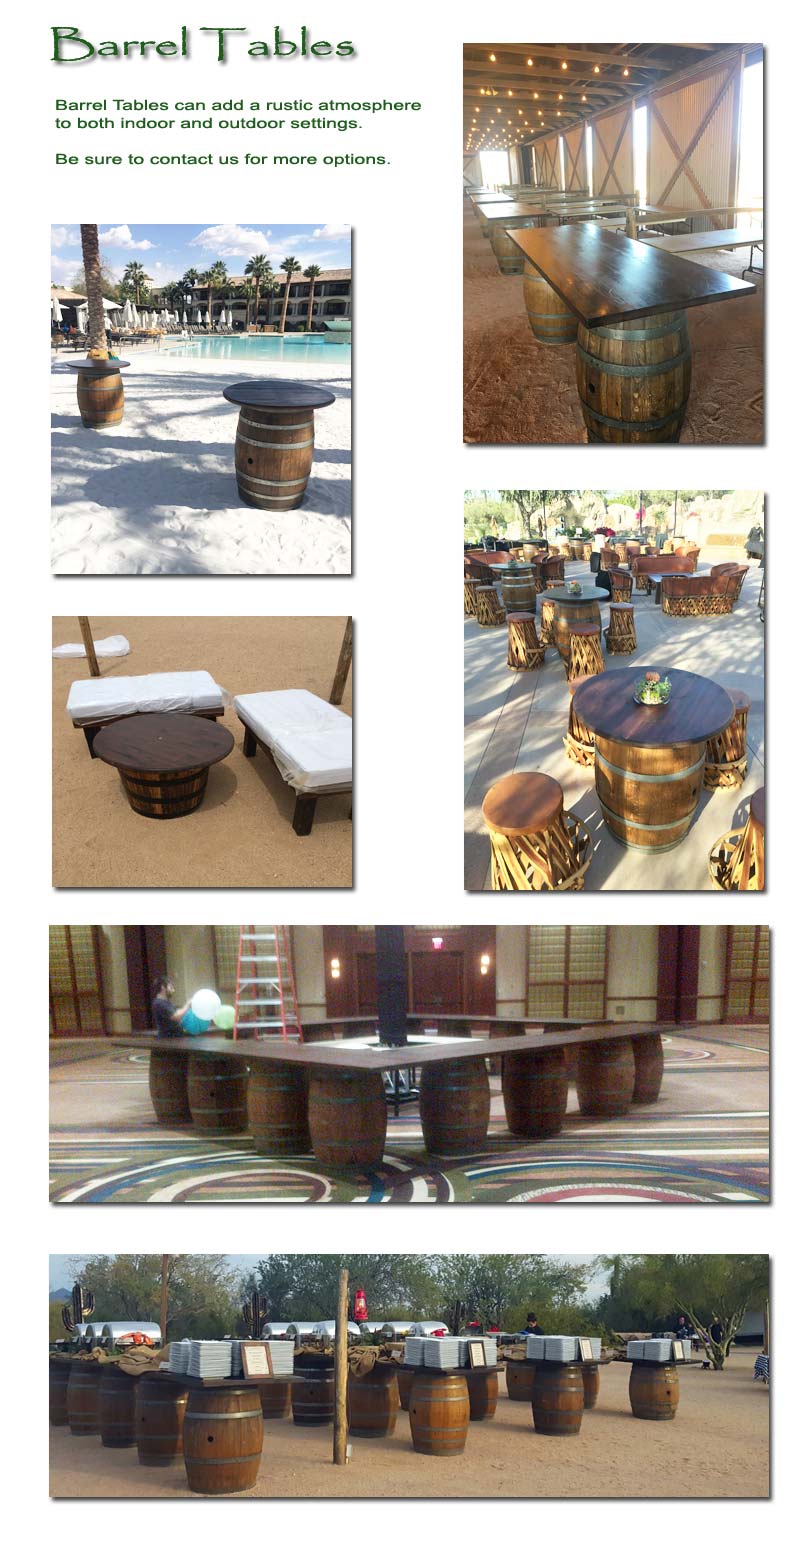 Barrel Tables can add a rustic atmosphere